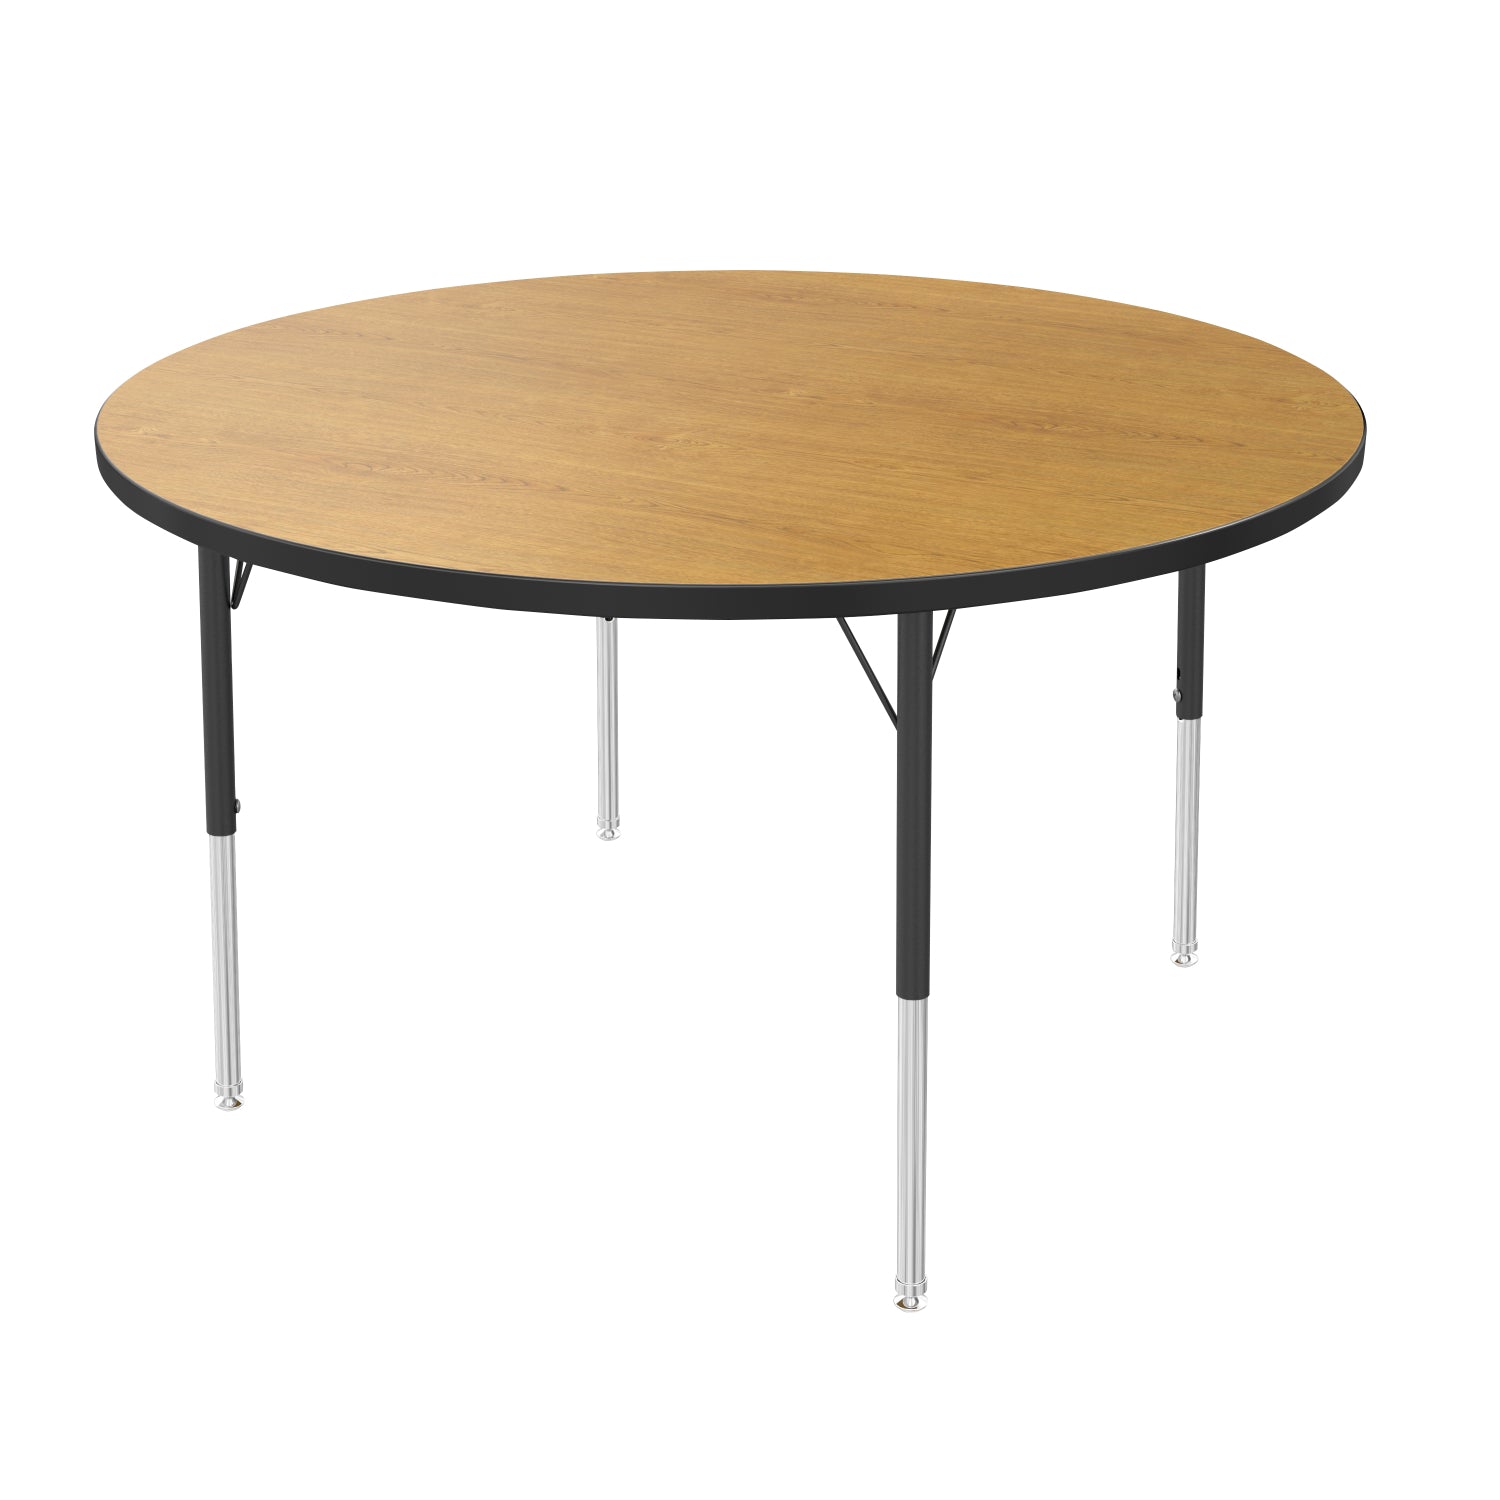 MG Series Adjustable Height Activity Table, 60" Round